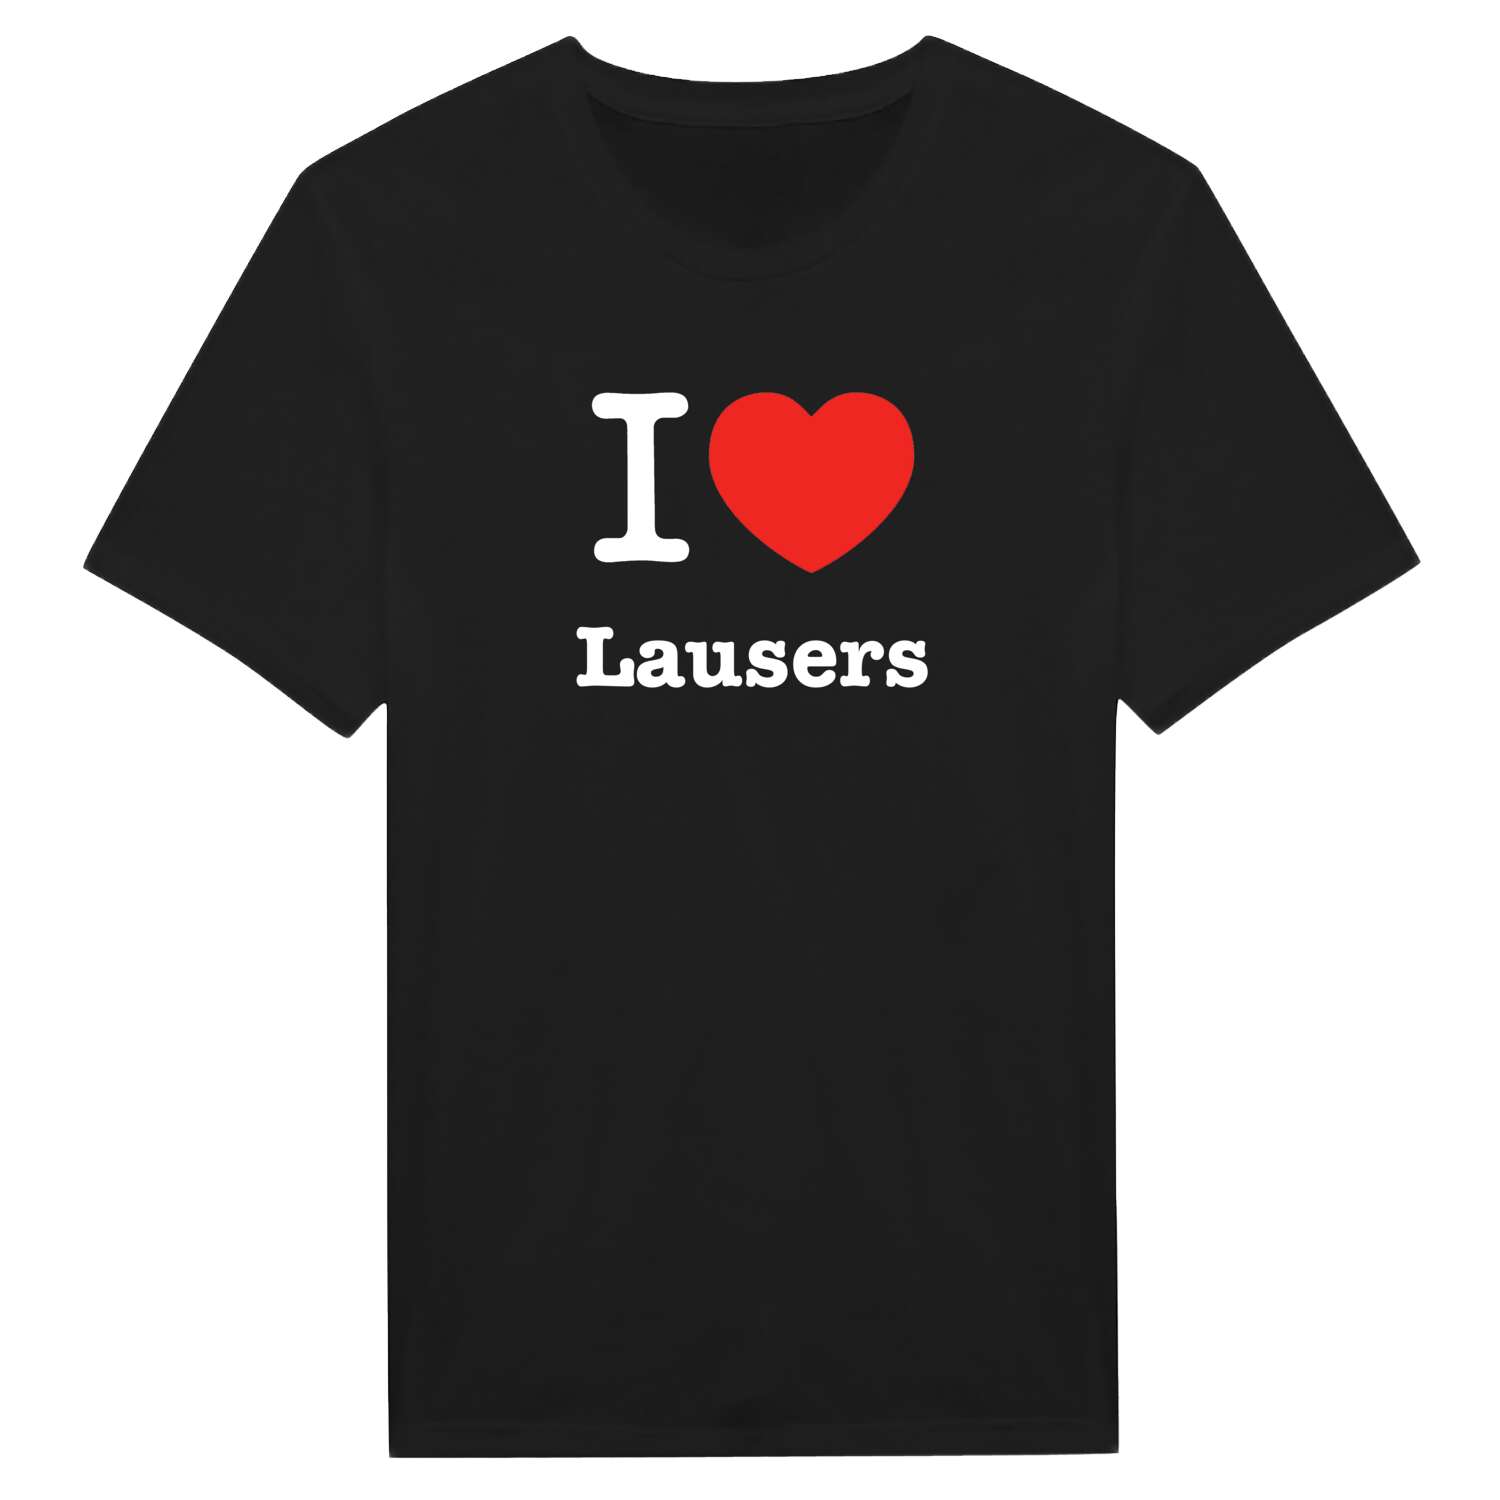 Lausers T-Shirt »I love«